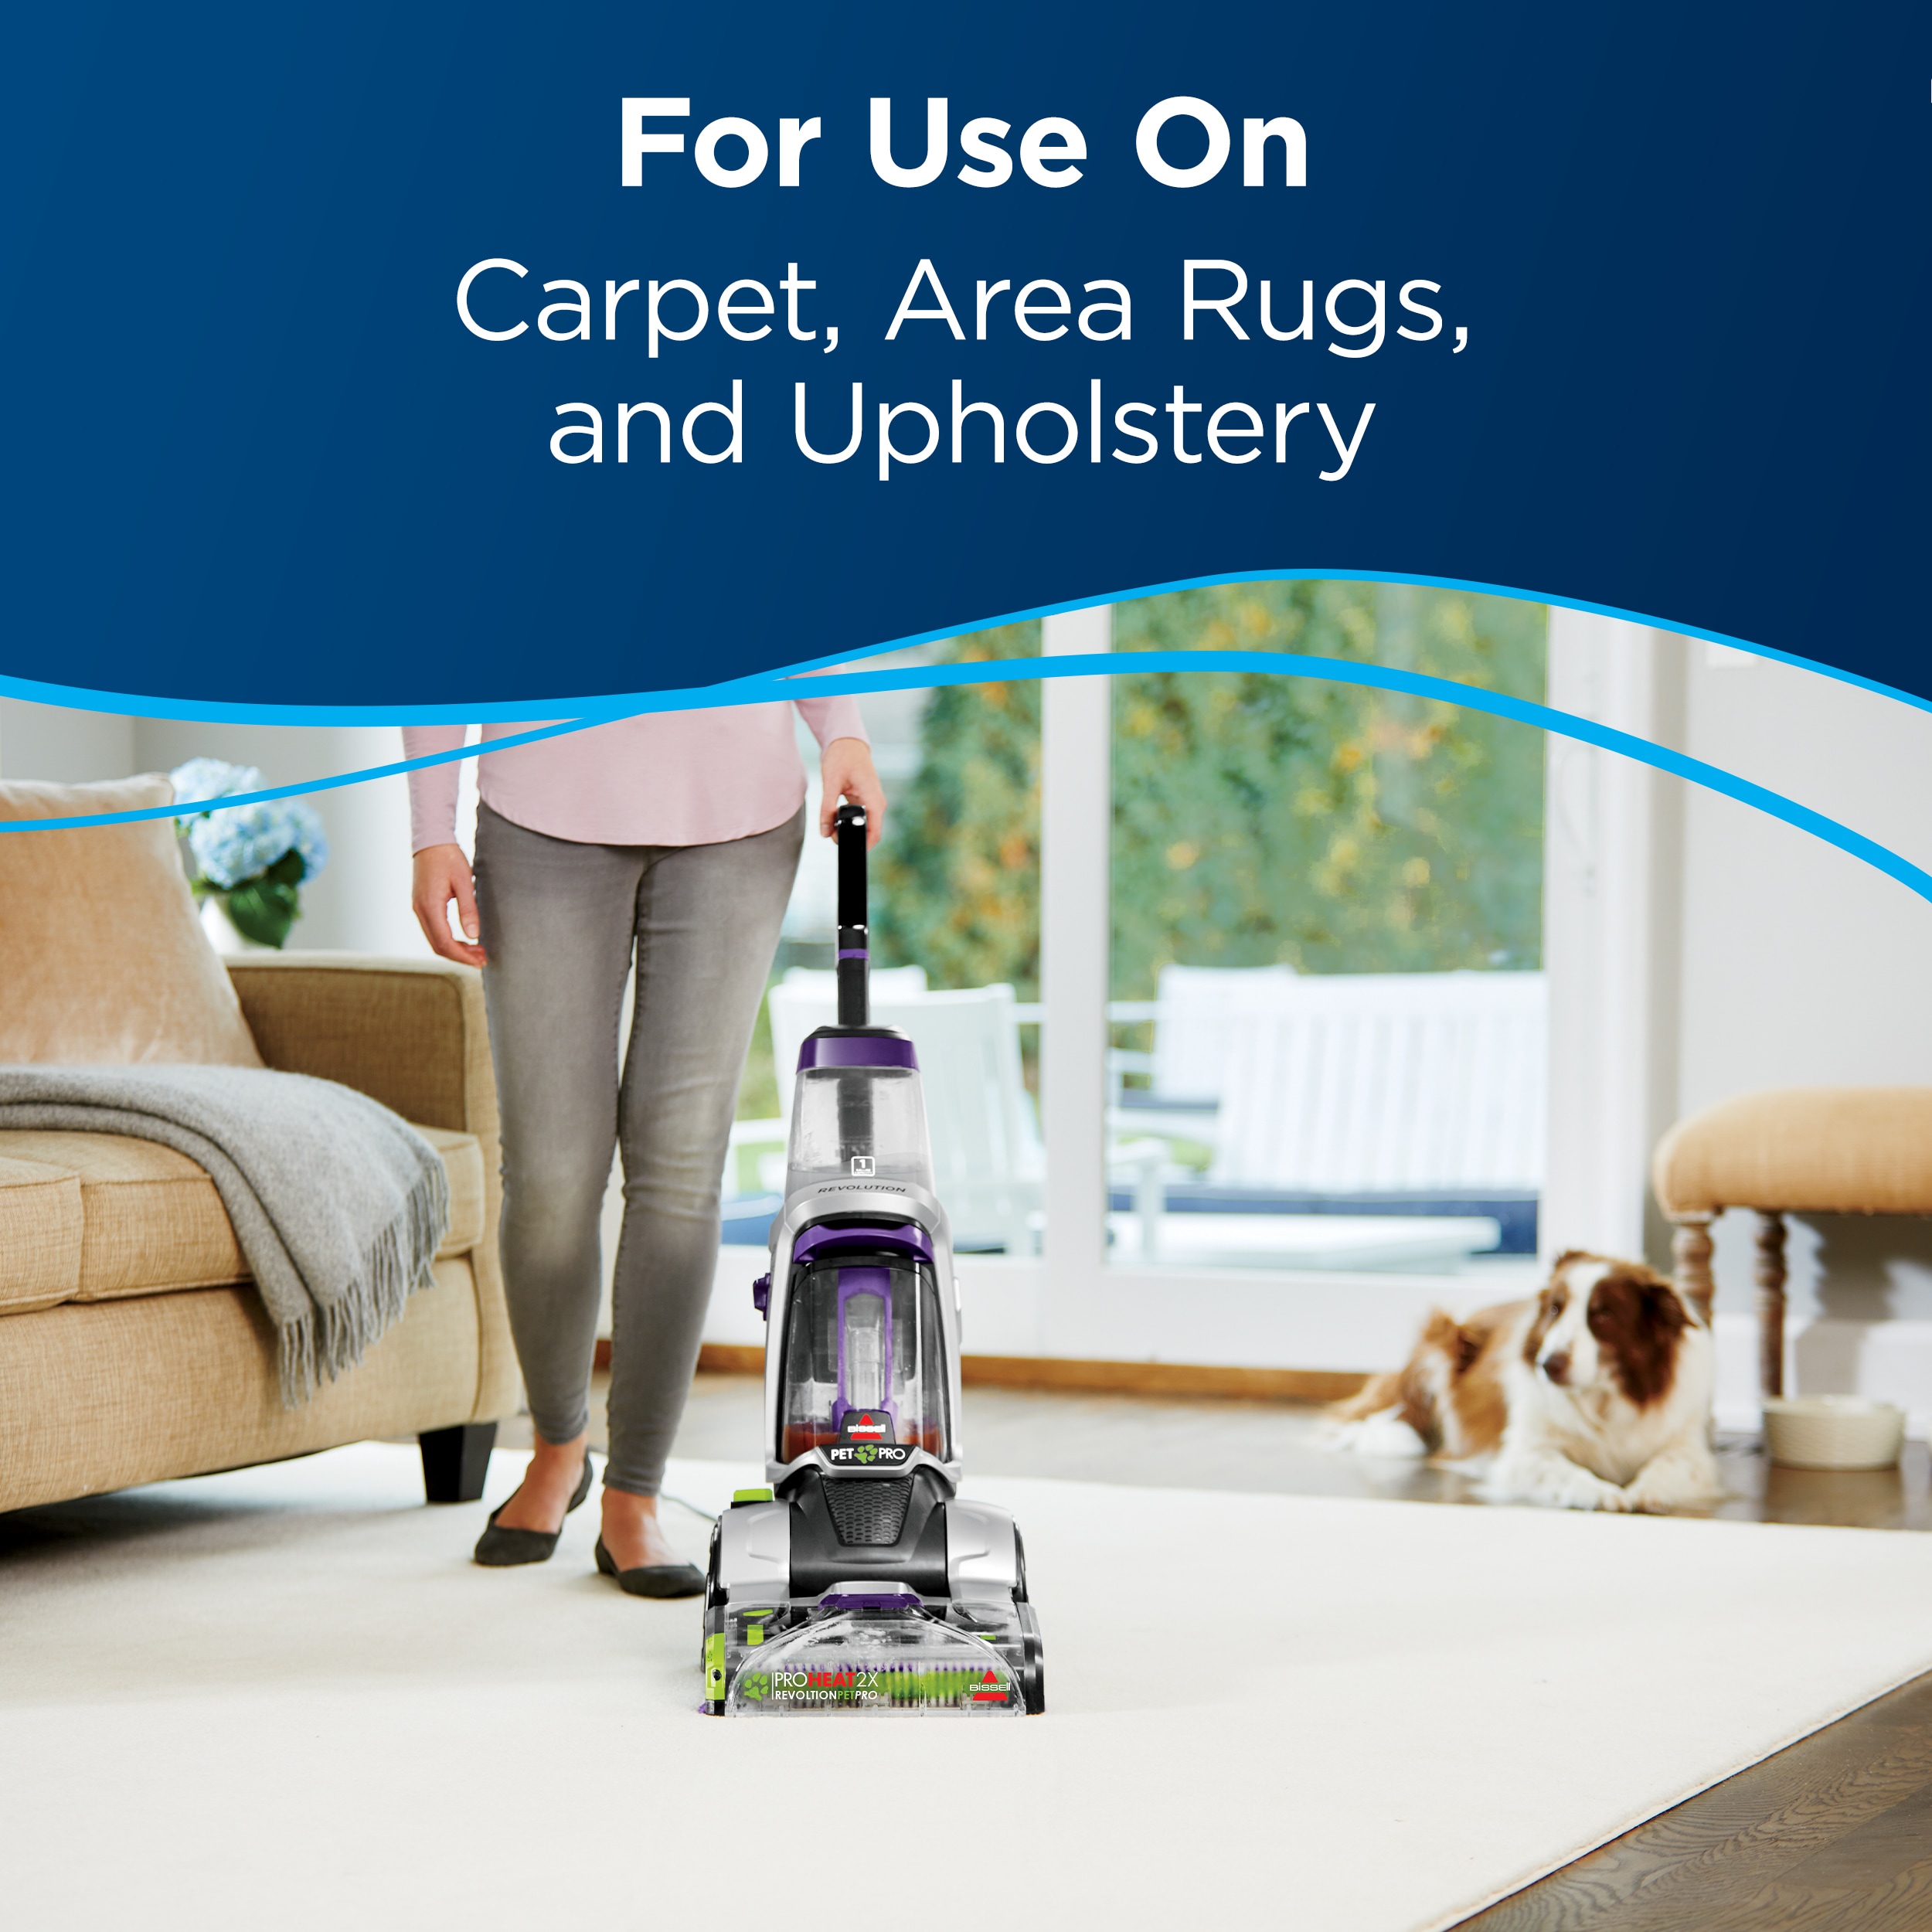 Bissell Wash & Protect Spring Breeze Fragrance Carpet Cleaning